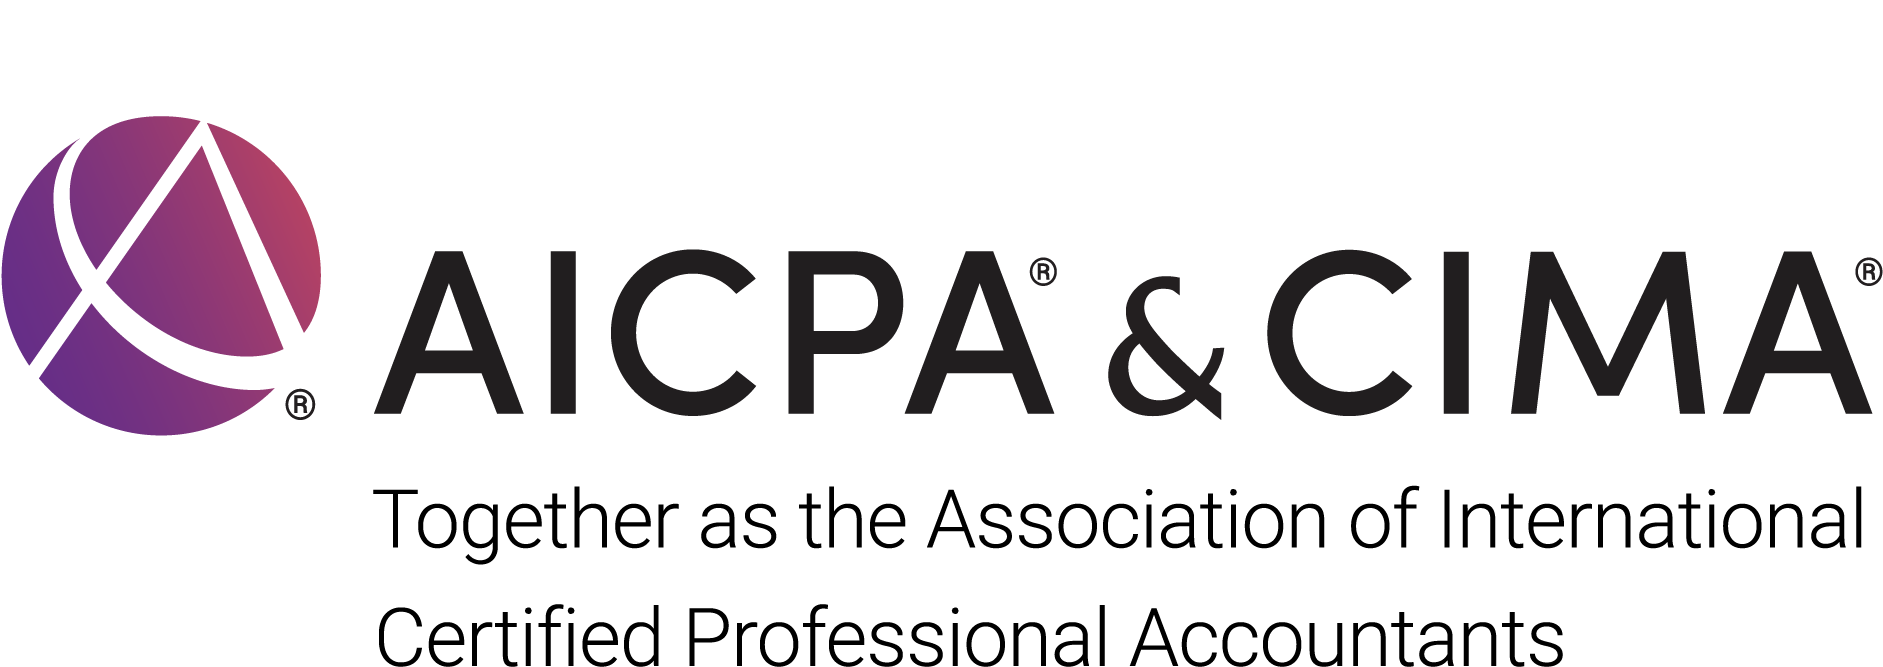 AICPA & CIMA with Association clear background